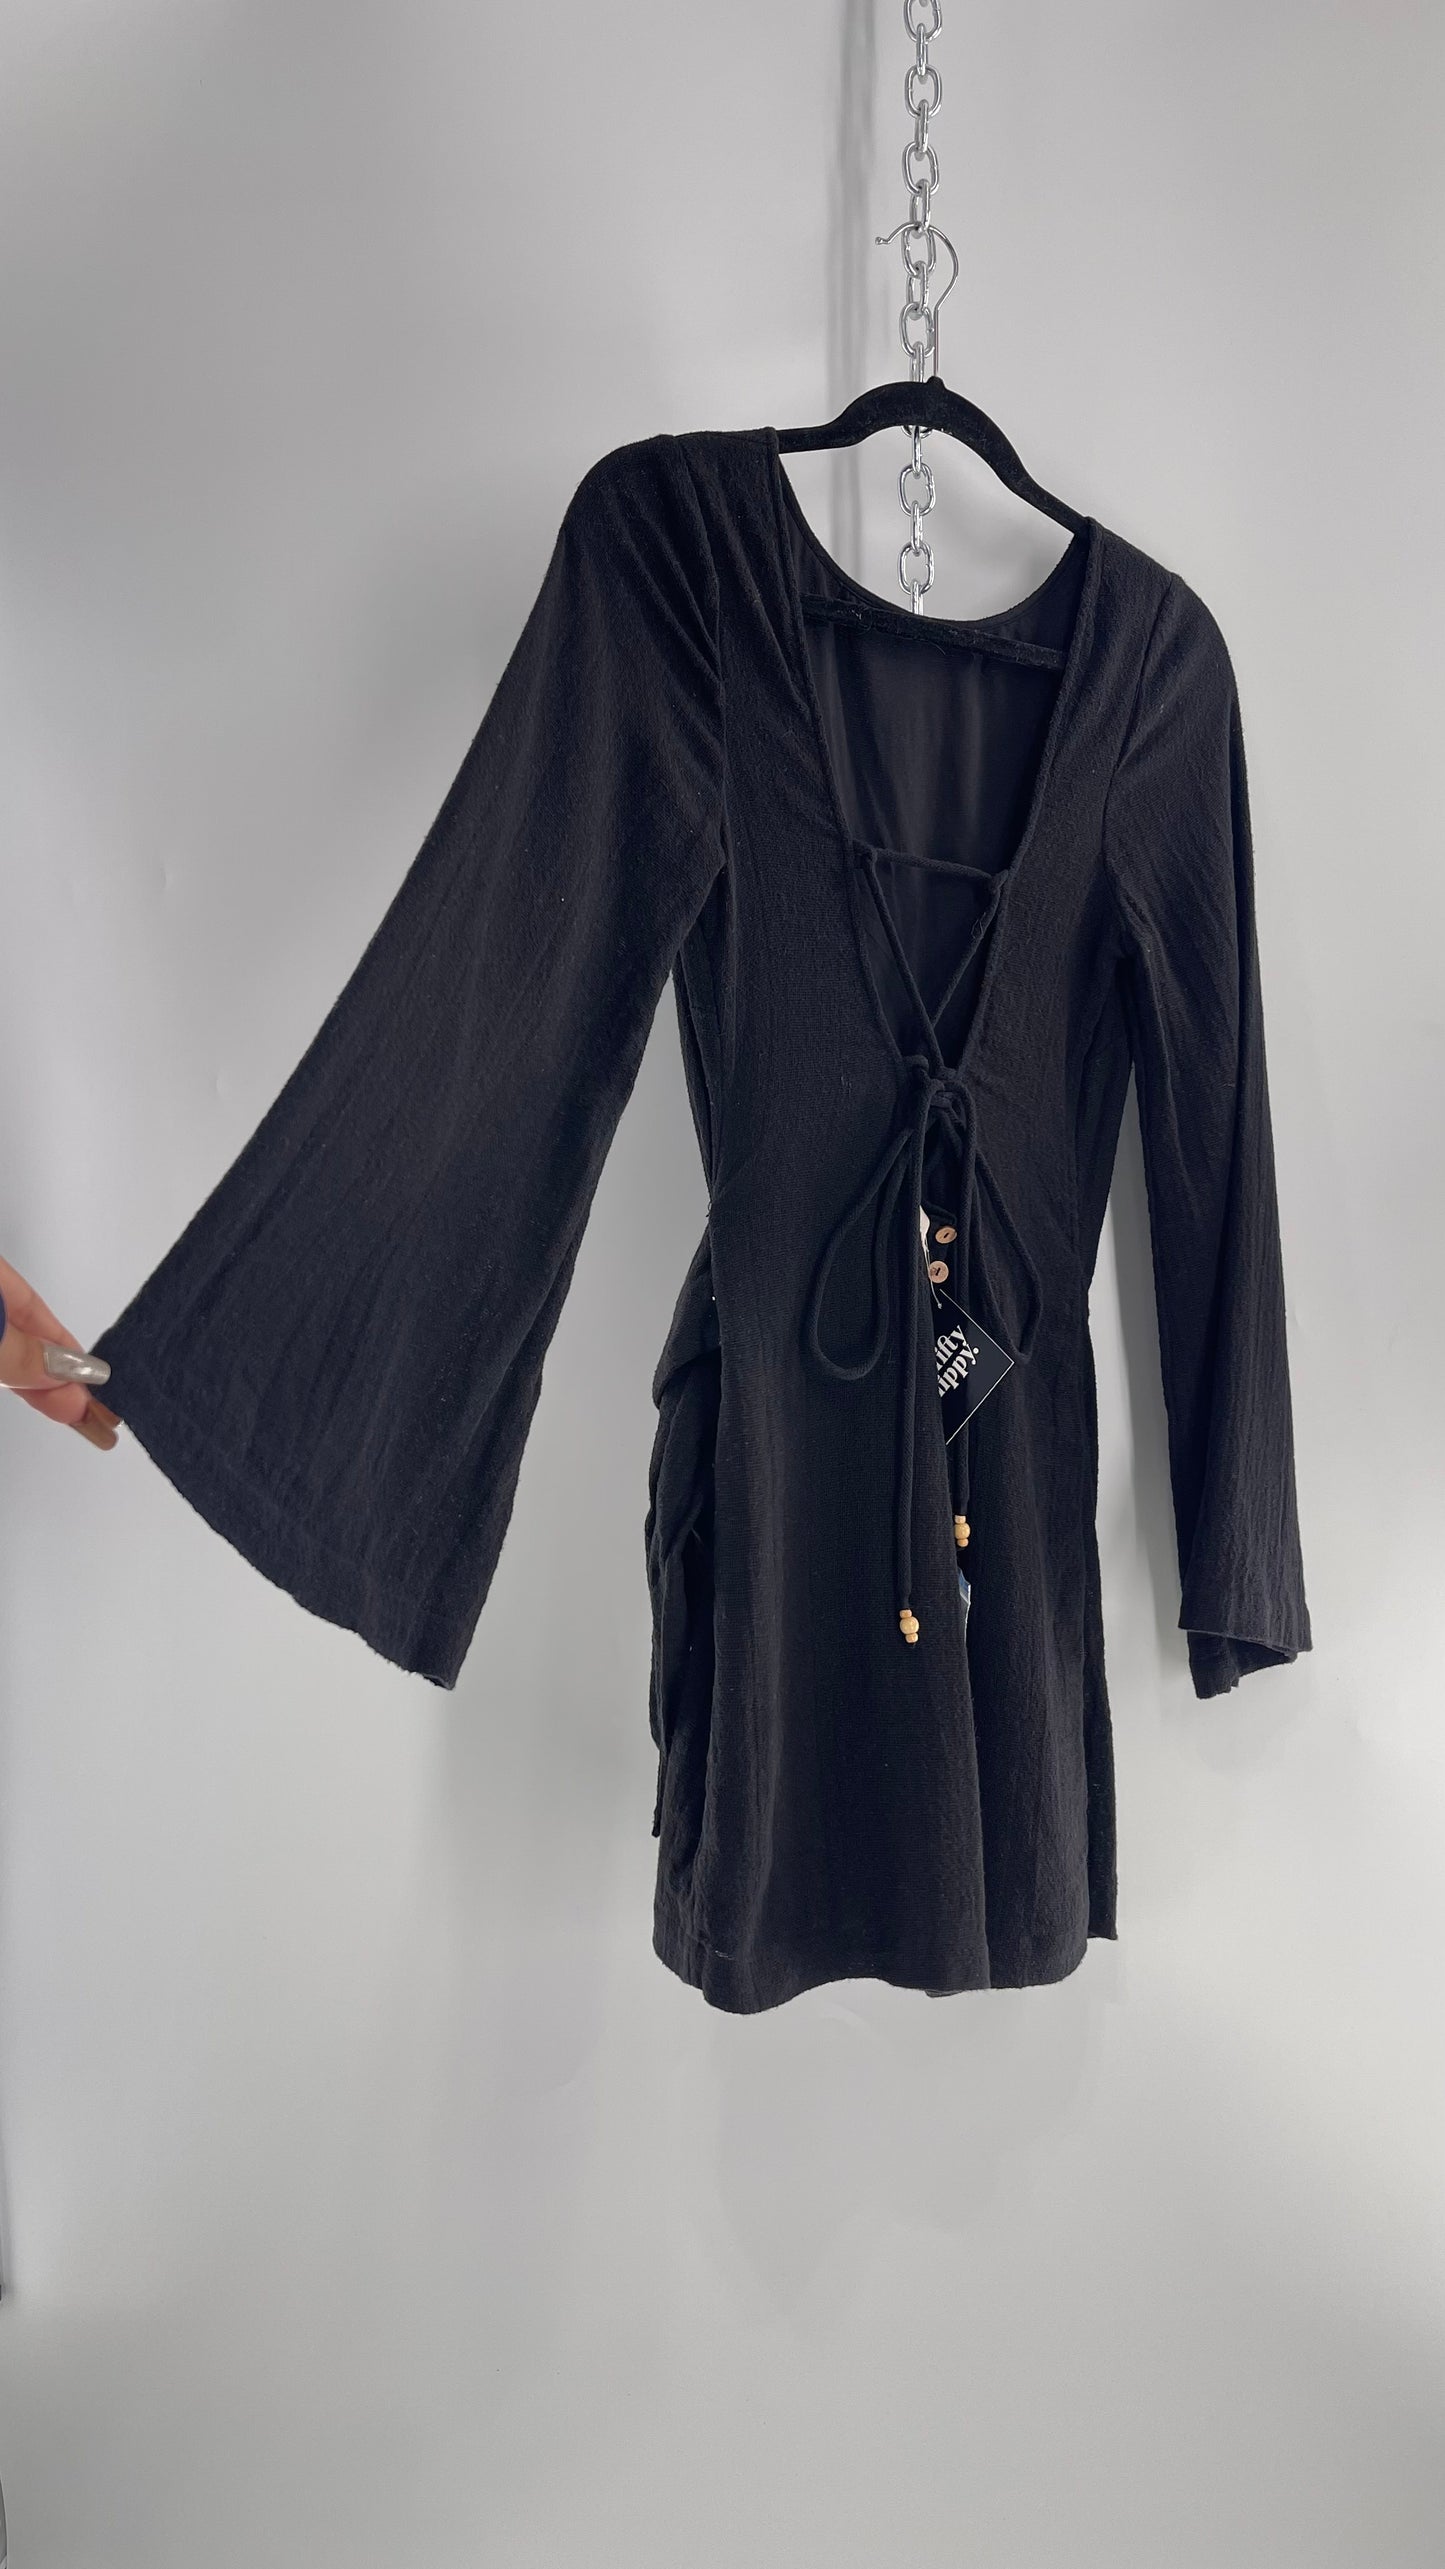 Free People Black Bell Sleeve 100% Cotton/Modal Mini Dress with Tie Front (M)